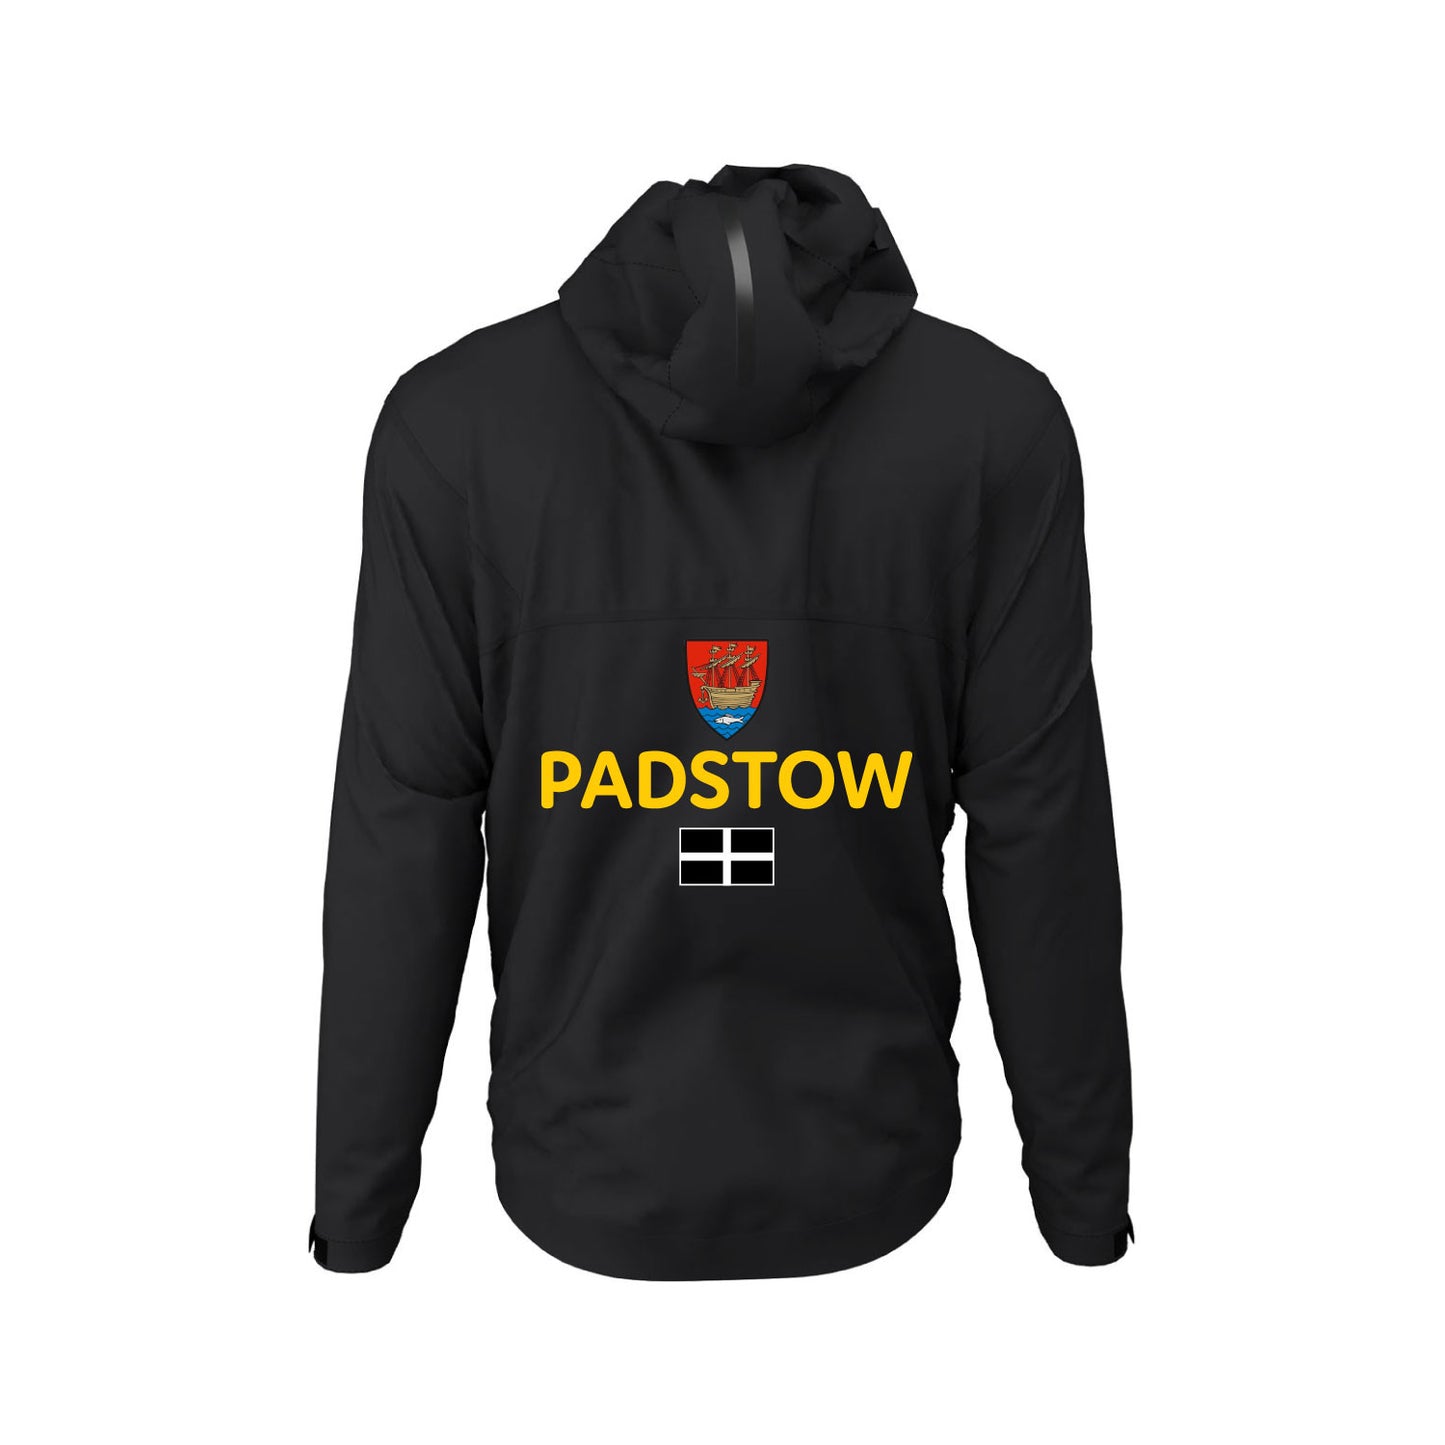 Padstow Rowing Club Technical Jacket